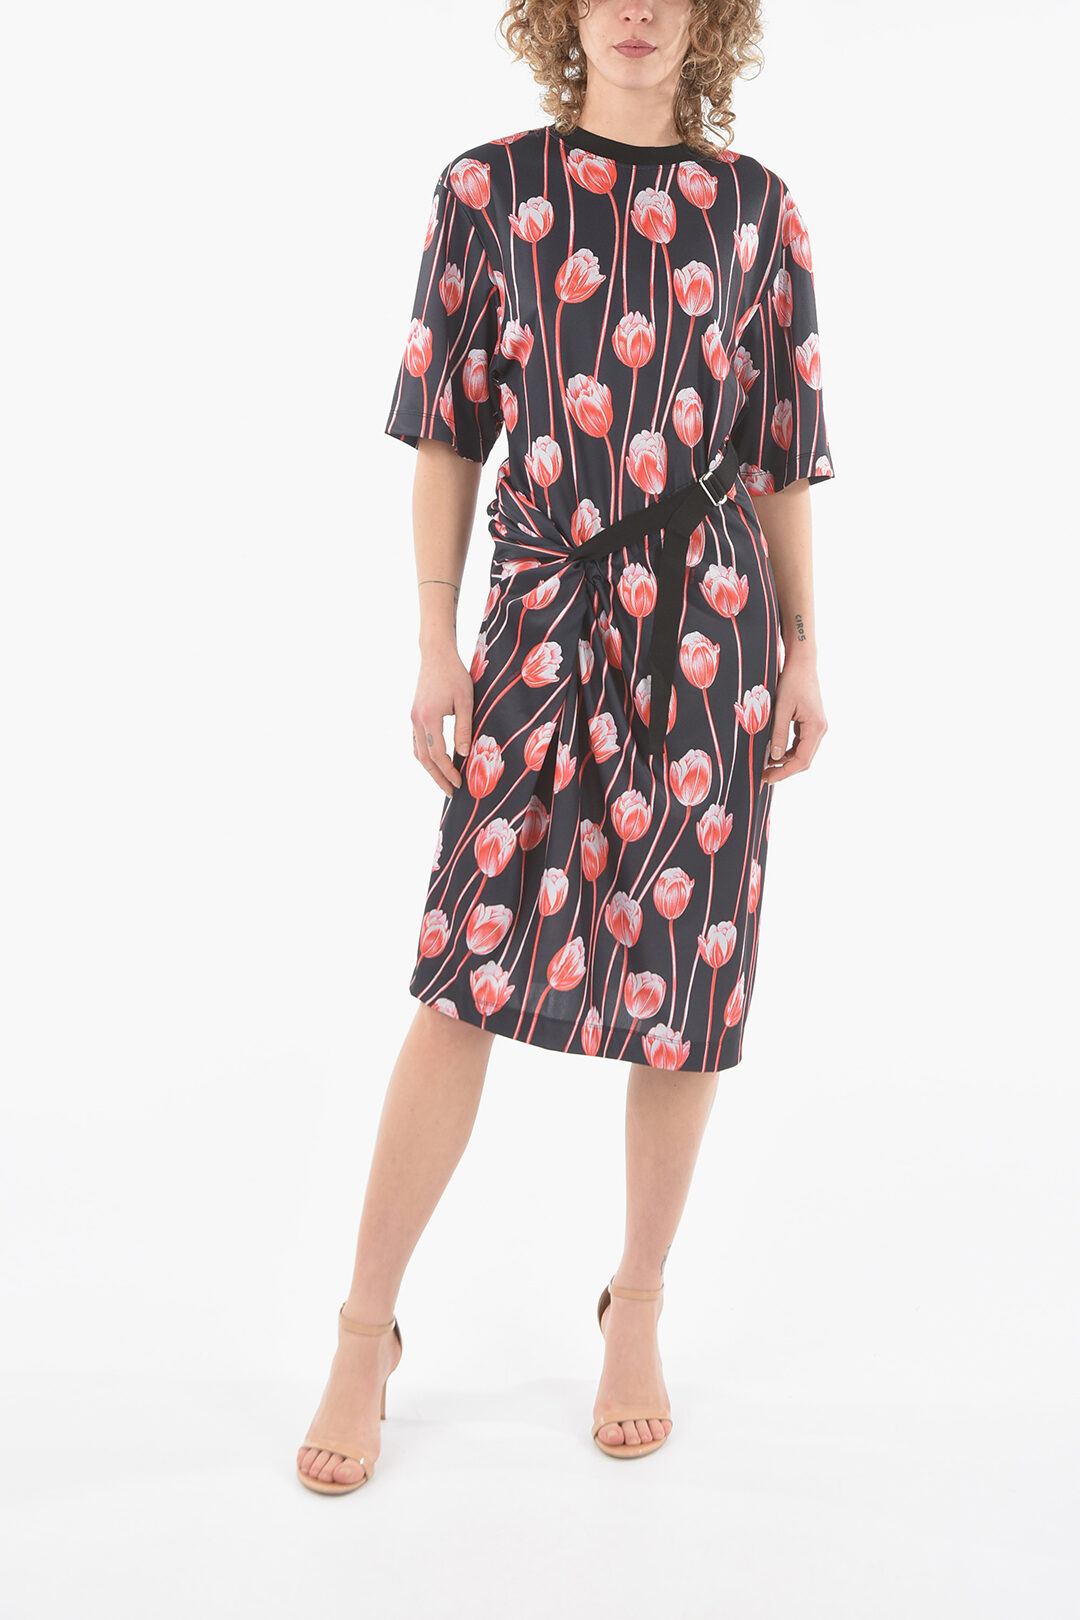 Kenzo Tulip-printed T-shirt-dress with Asymmetric D-ring Belt women -  Glamood Outlet